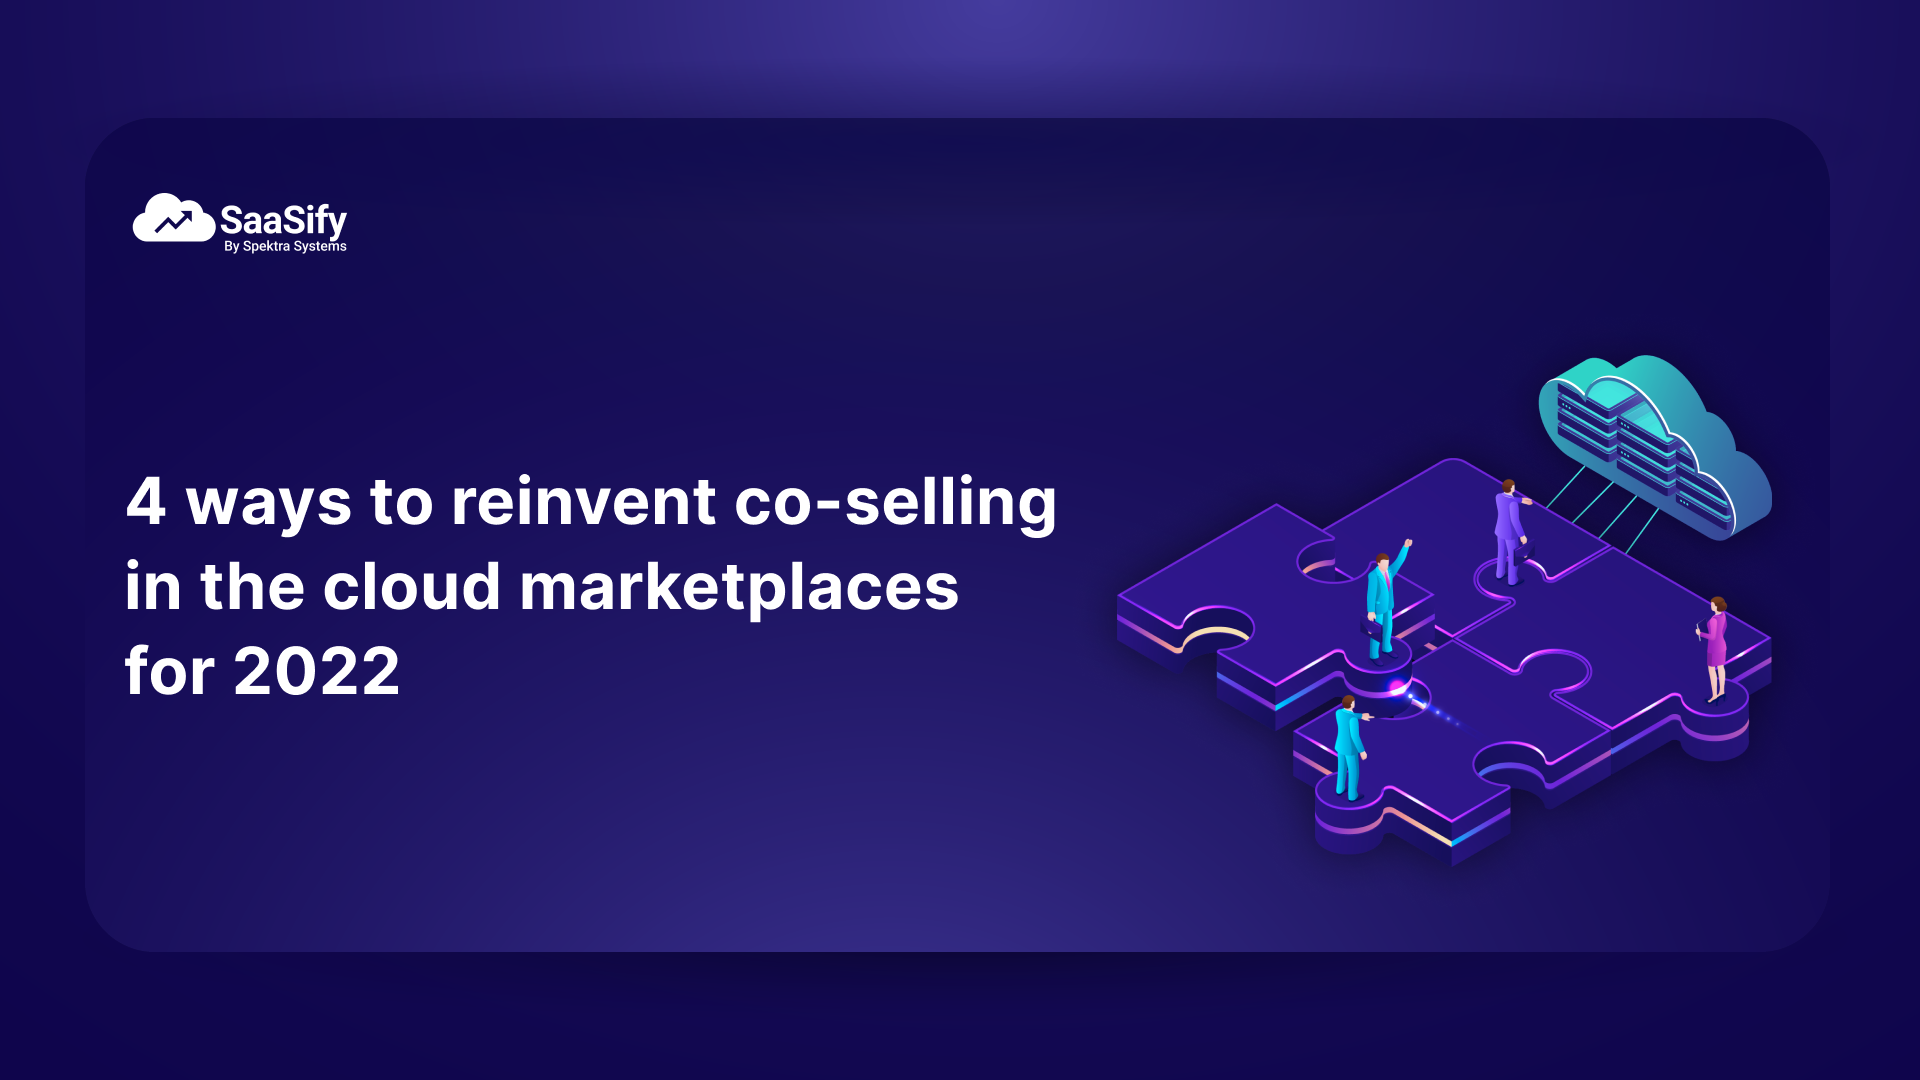 4 effective ways to reinvent co-selling in the Cloud Marketplaces for 2022